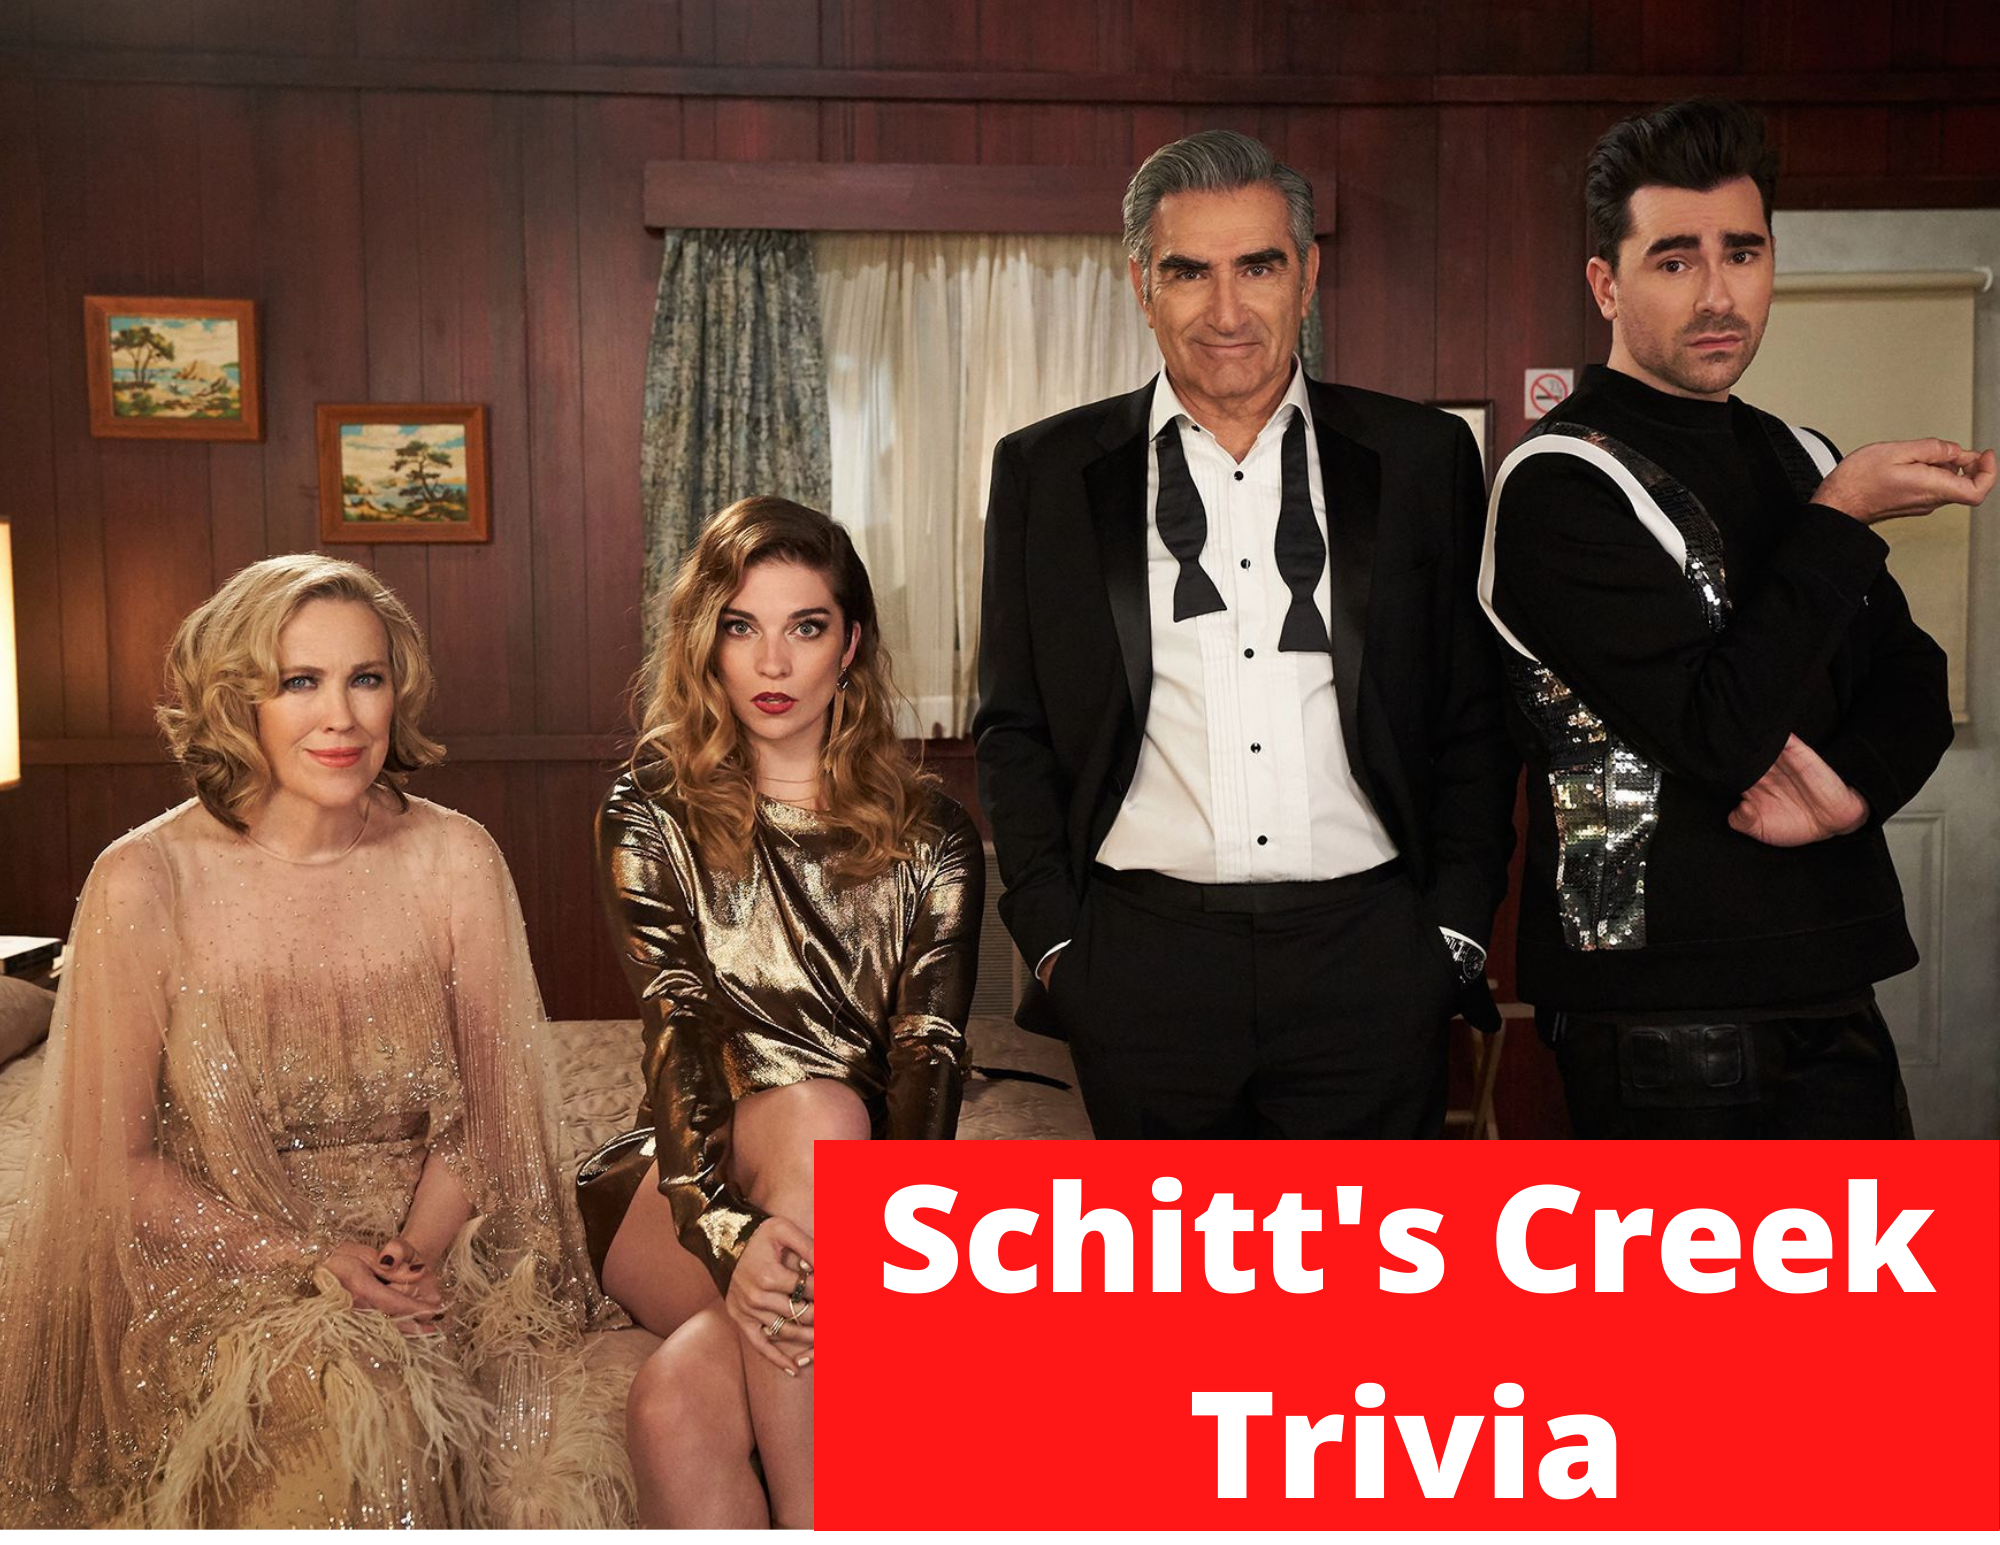 Picture of Schitt's Creek cast with Schitt's Creek Trivia written out on a red background on the lower right corner. 